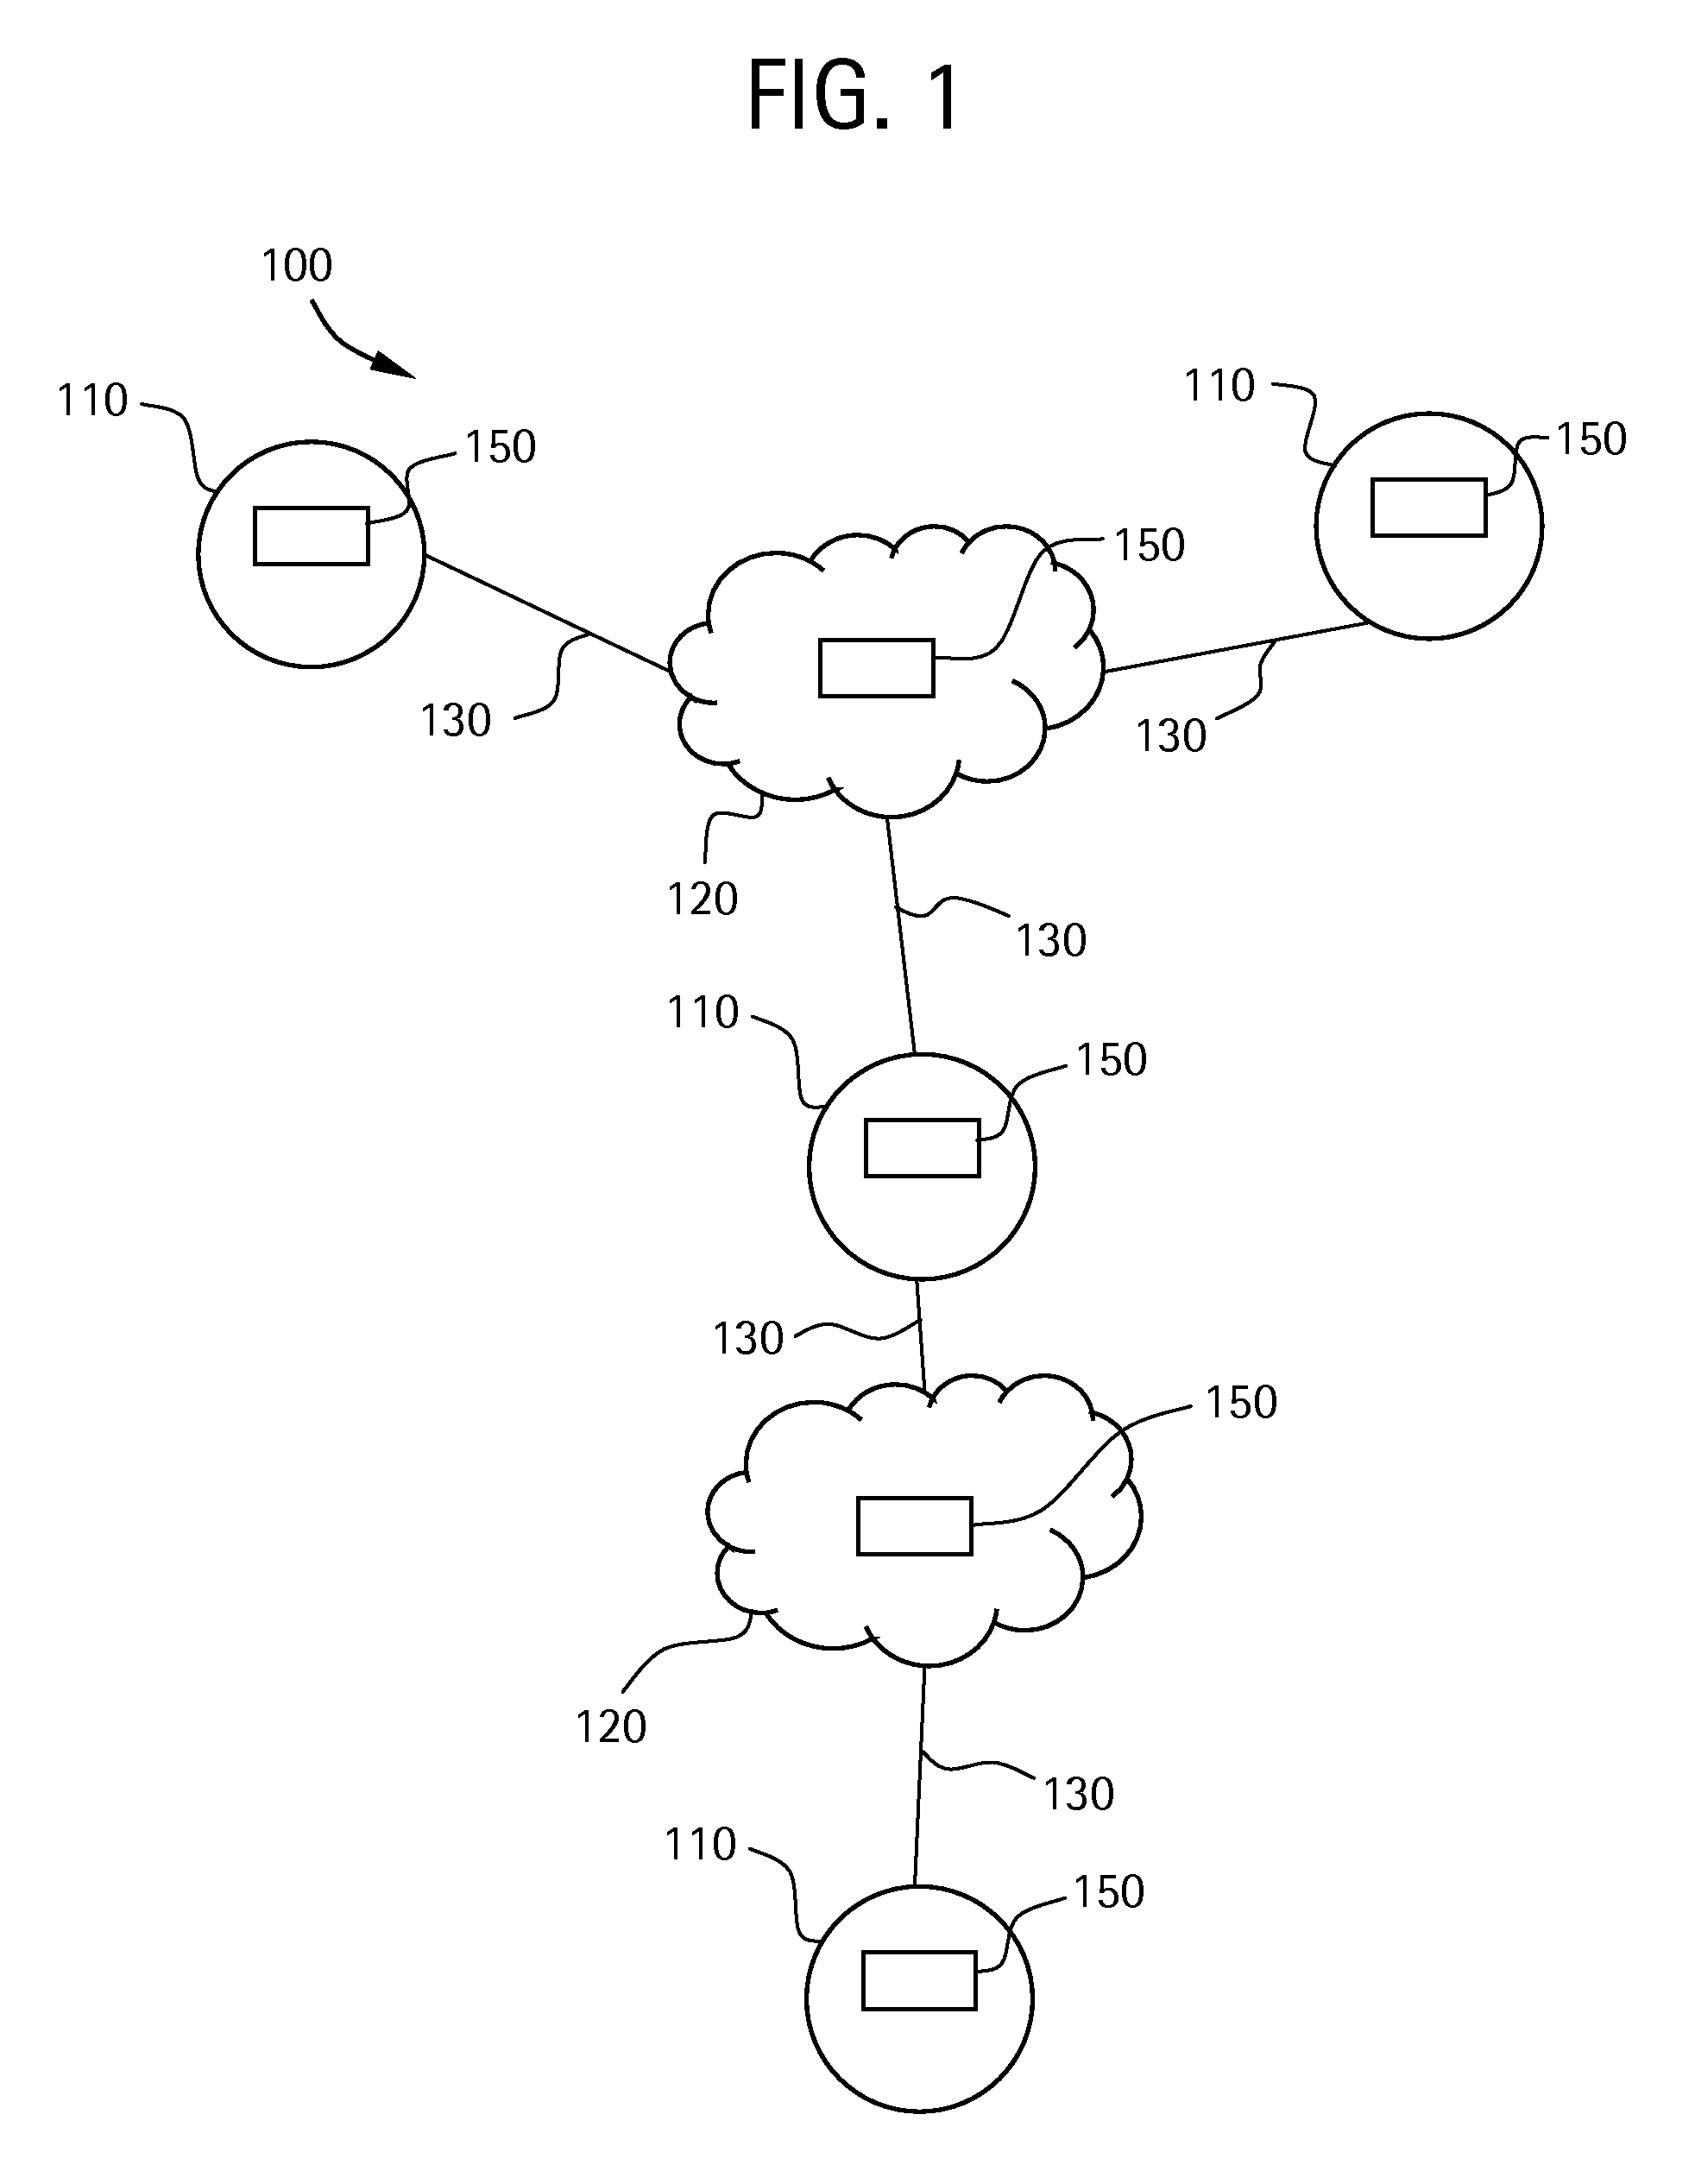 Systems and methods for dynamic mode-driven link management